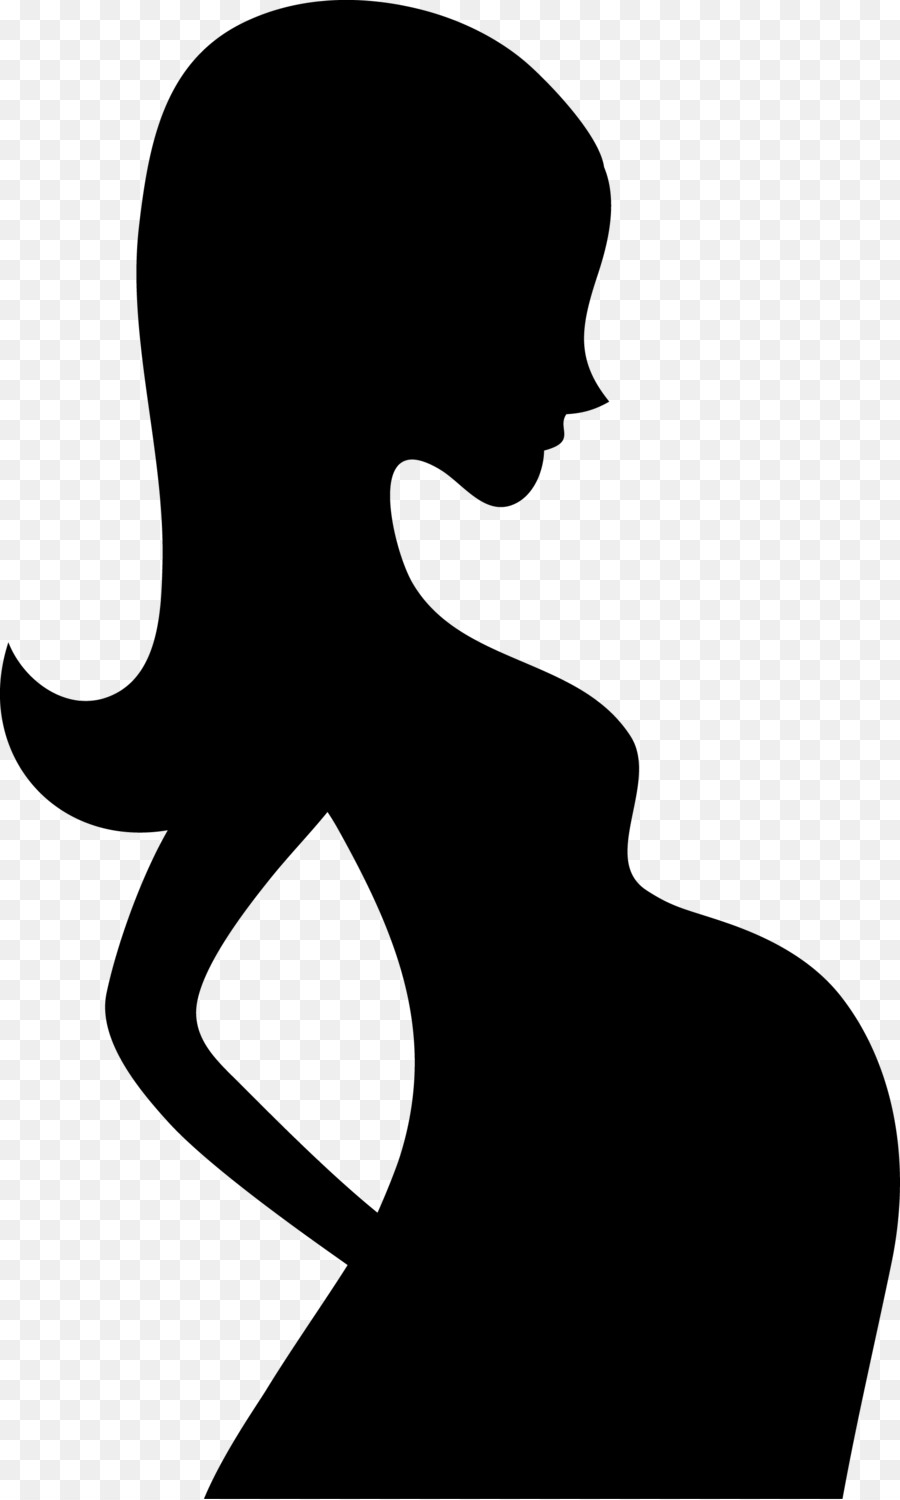 Pregnancy Clip art - mother child silhouette png download - 1890*3147 - Free Transparent Pregnancy png Download.